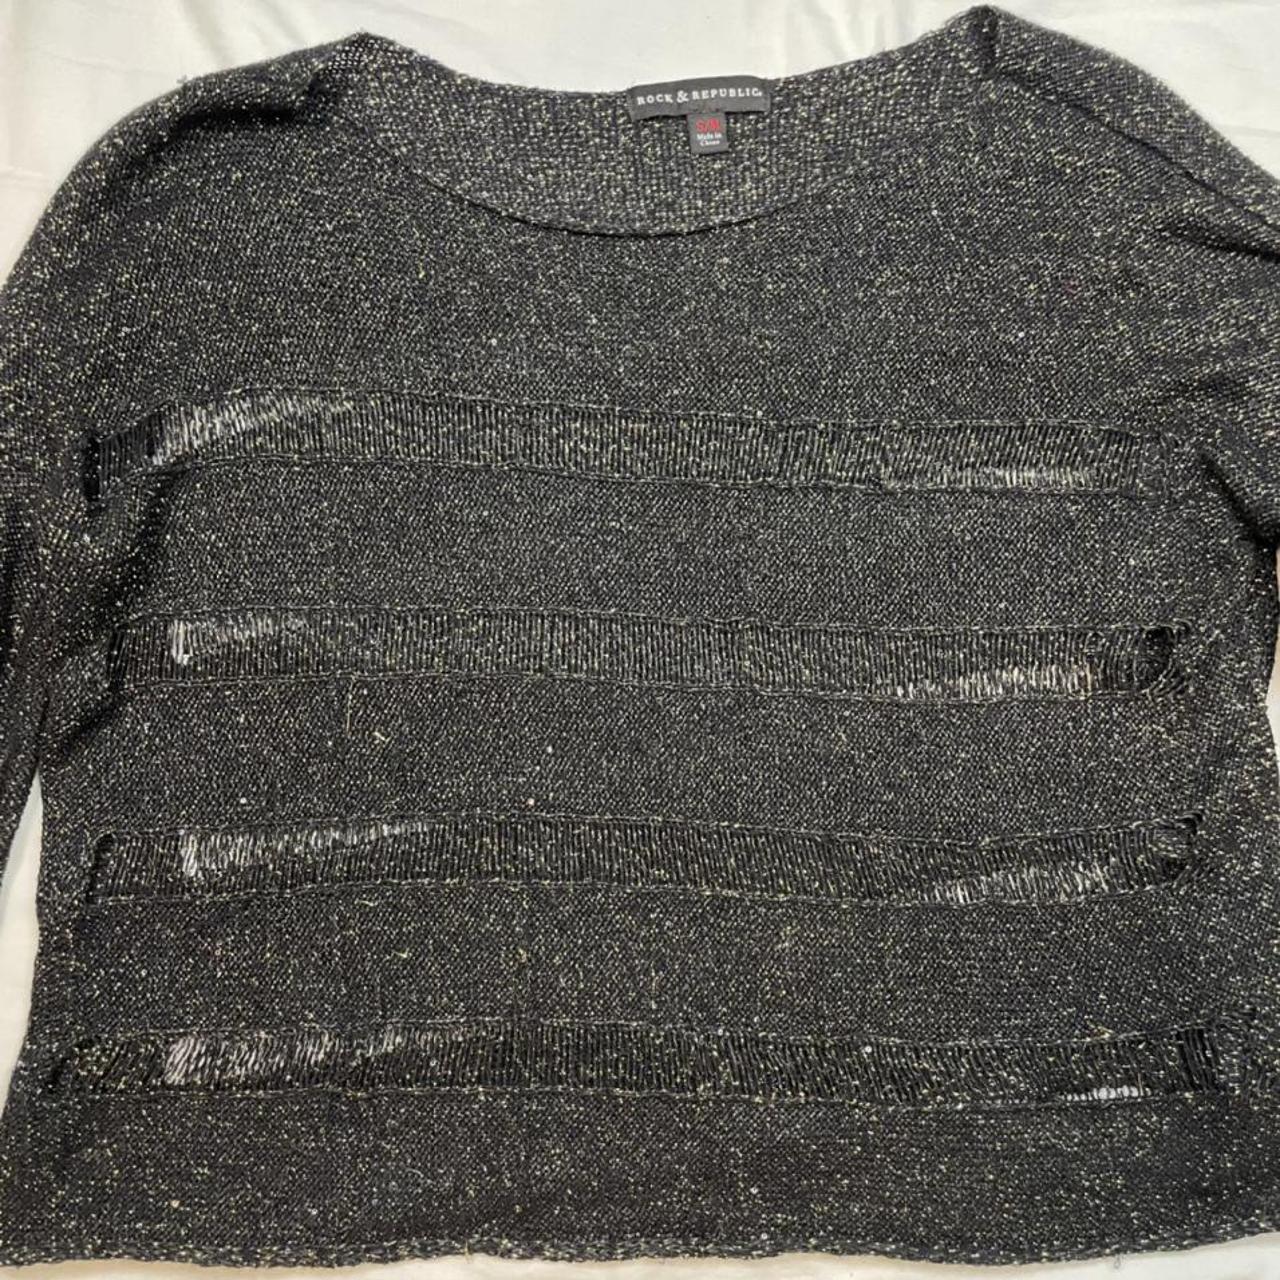 Rock and Republic Women's Gold and Black Jumper (2)